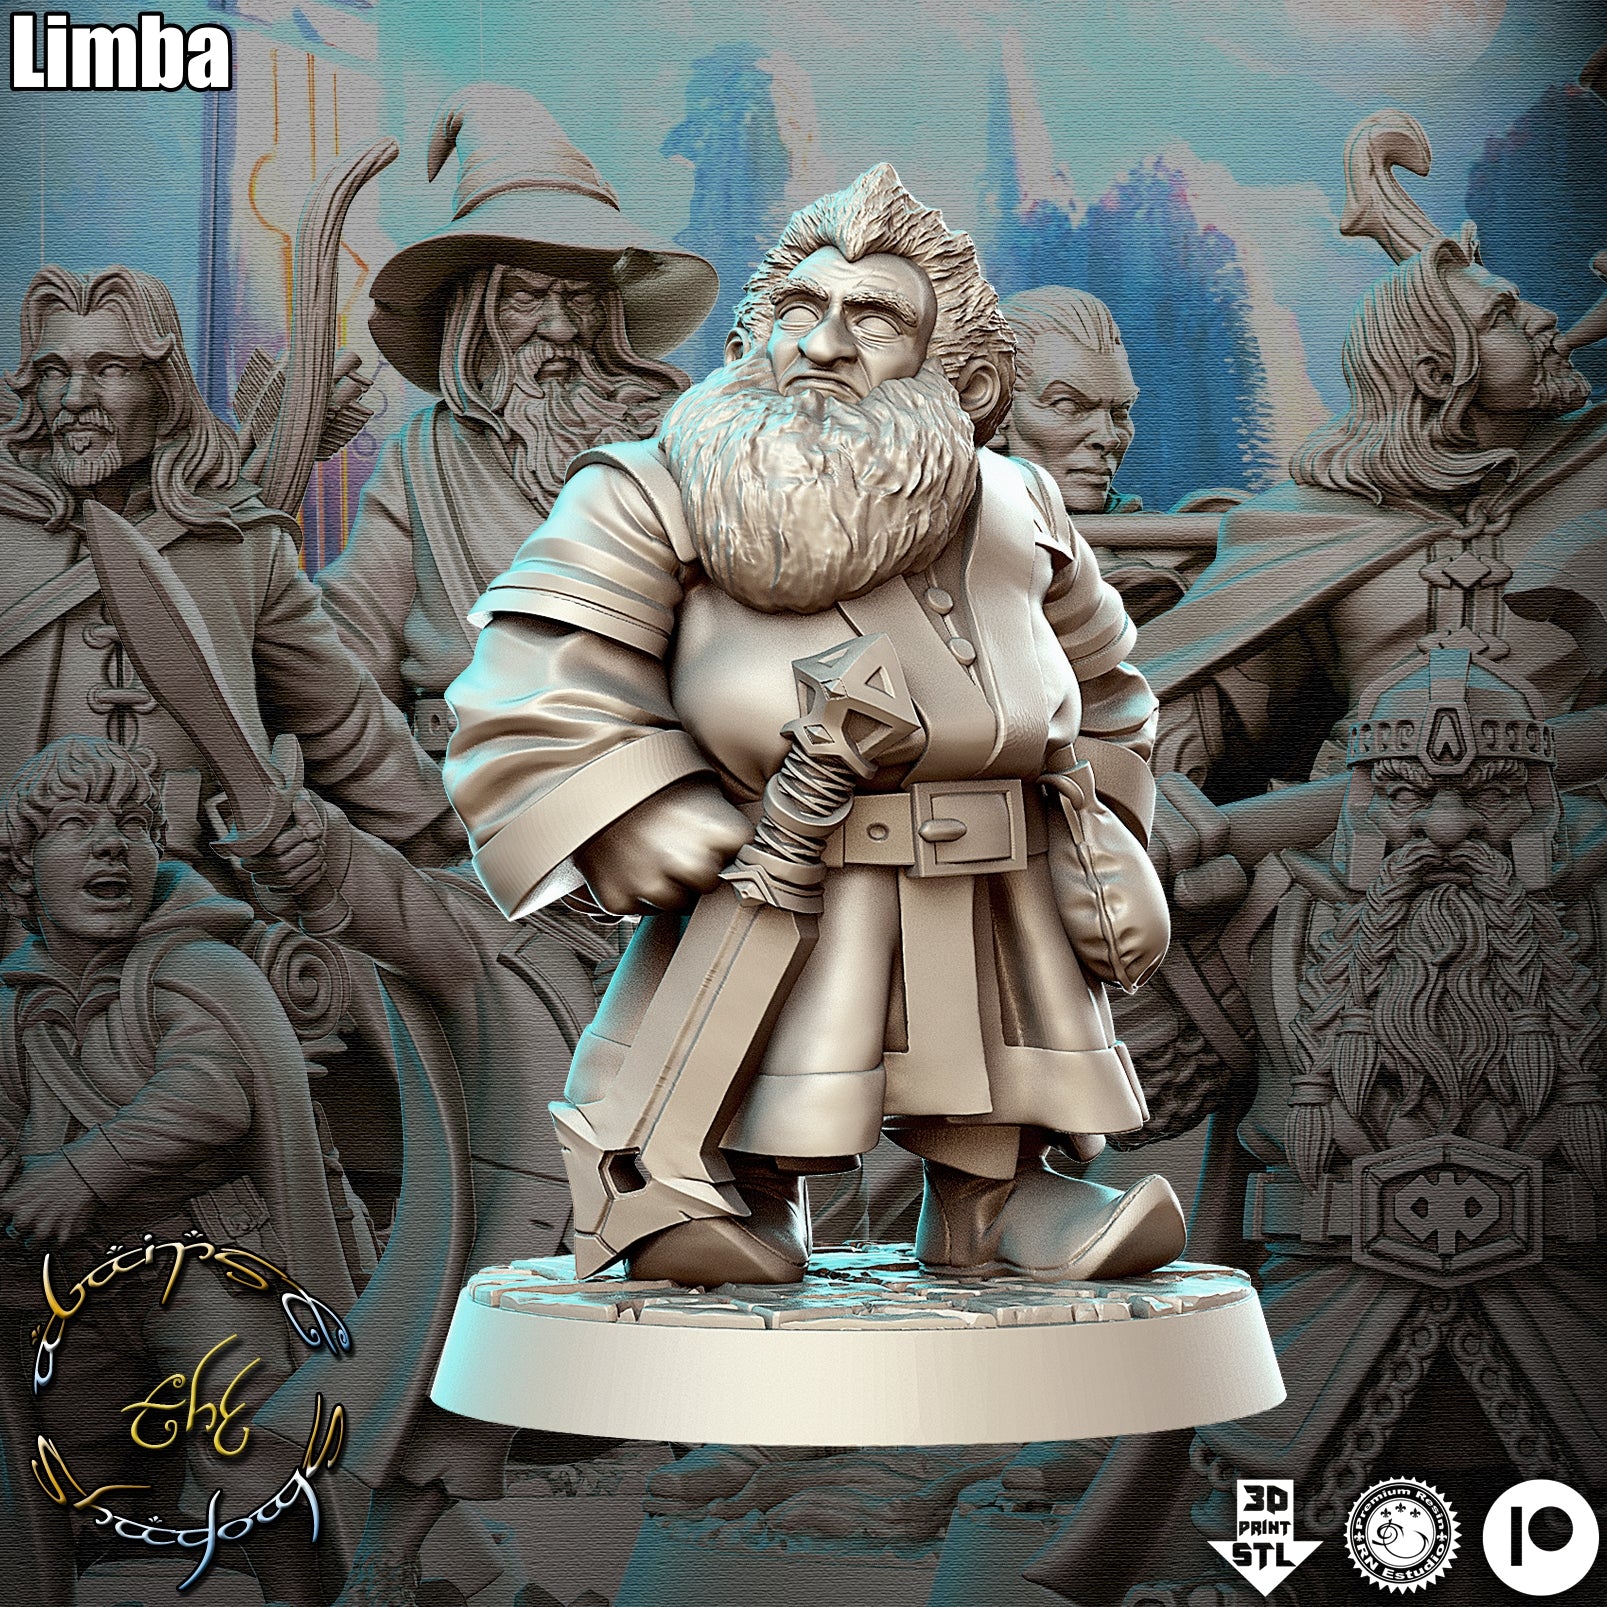 Limba - Against the Shadows - Green Wildling Miniatures